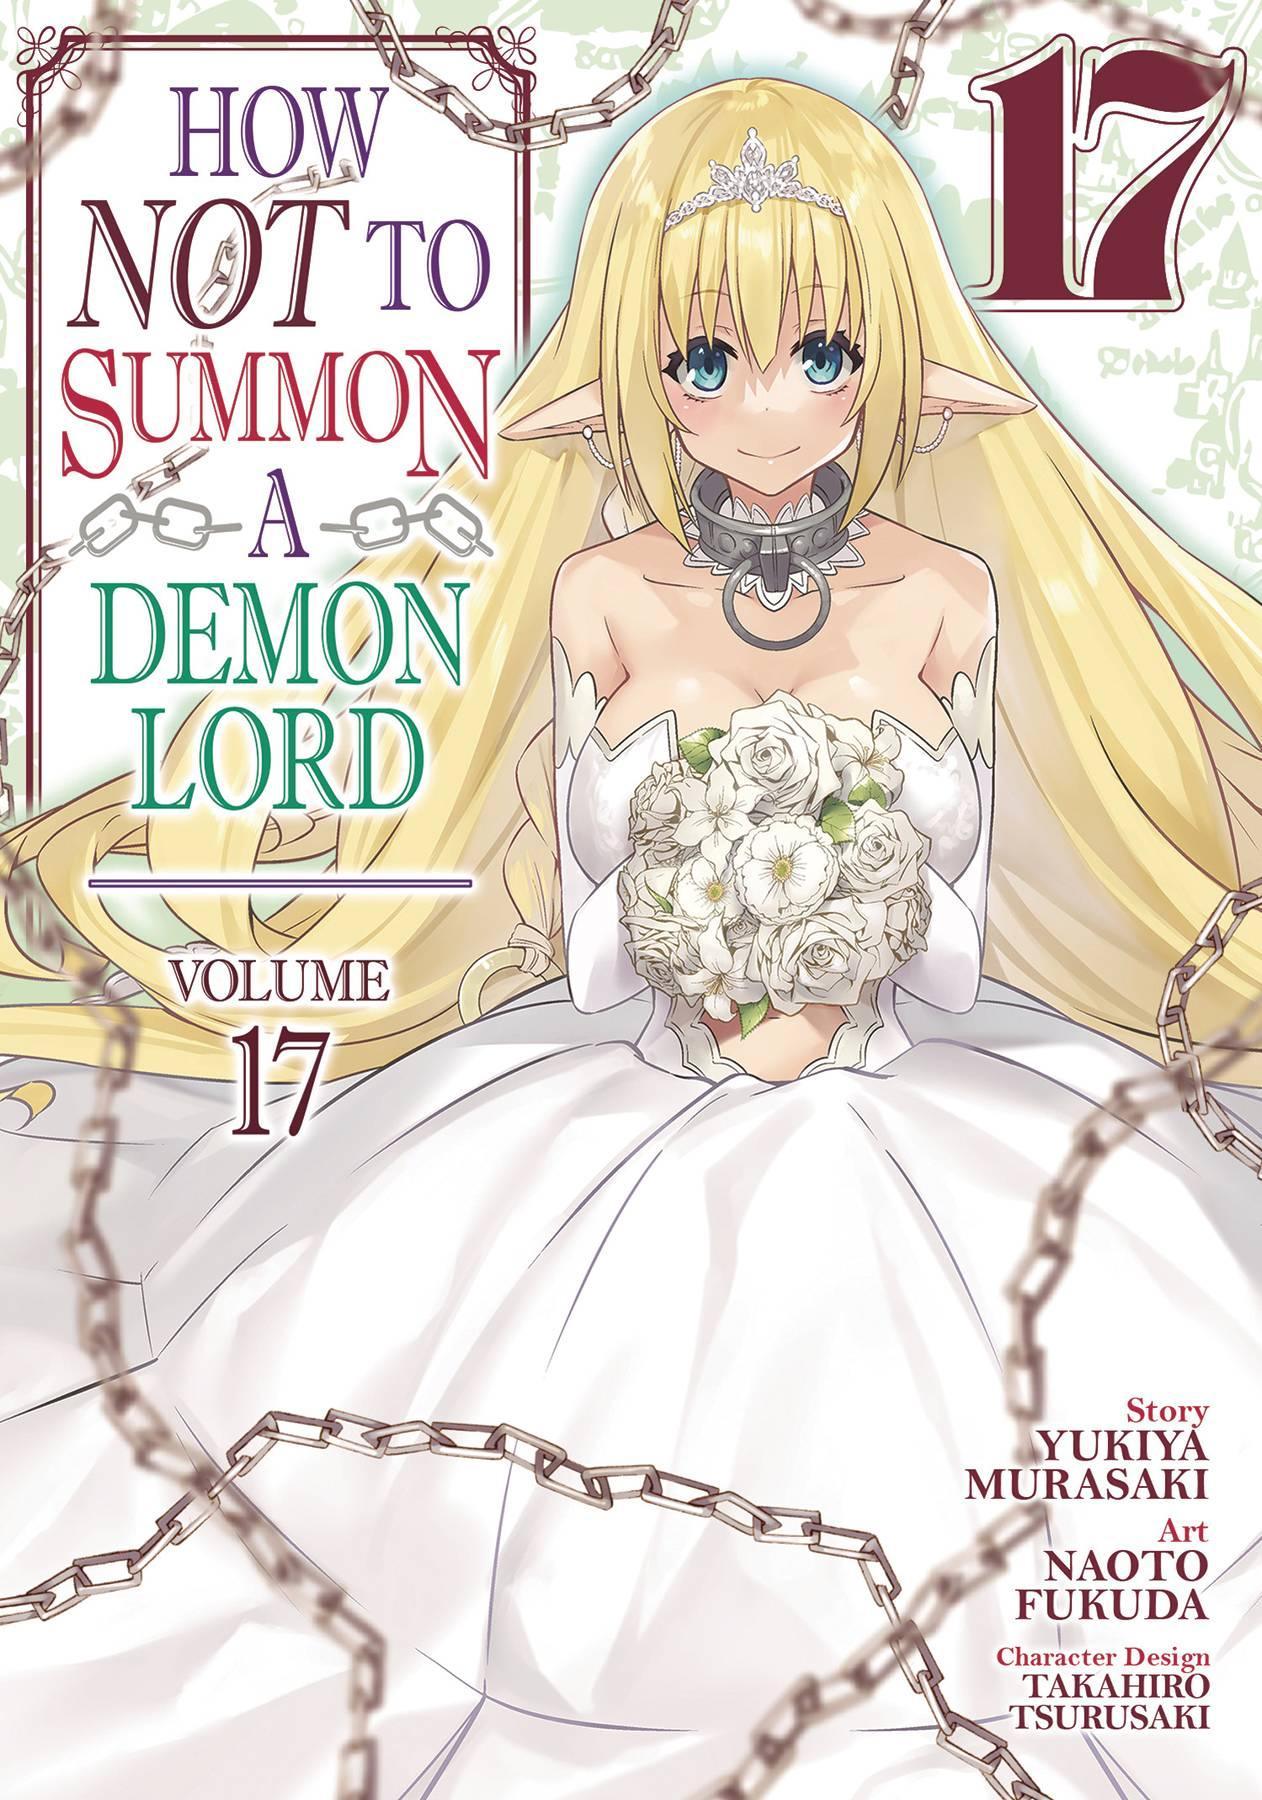 HOW NOT TO SUMMON DEMON LORD GN VOL 17 - Kings Comics